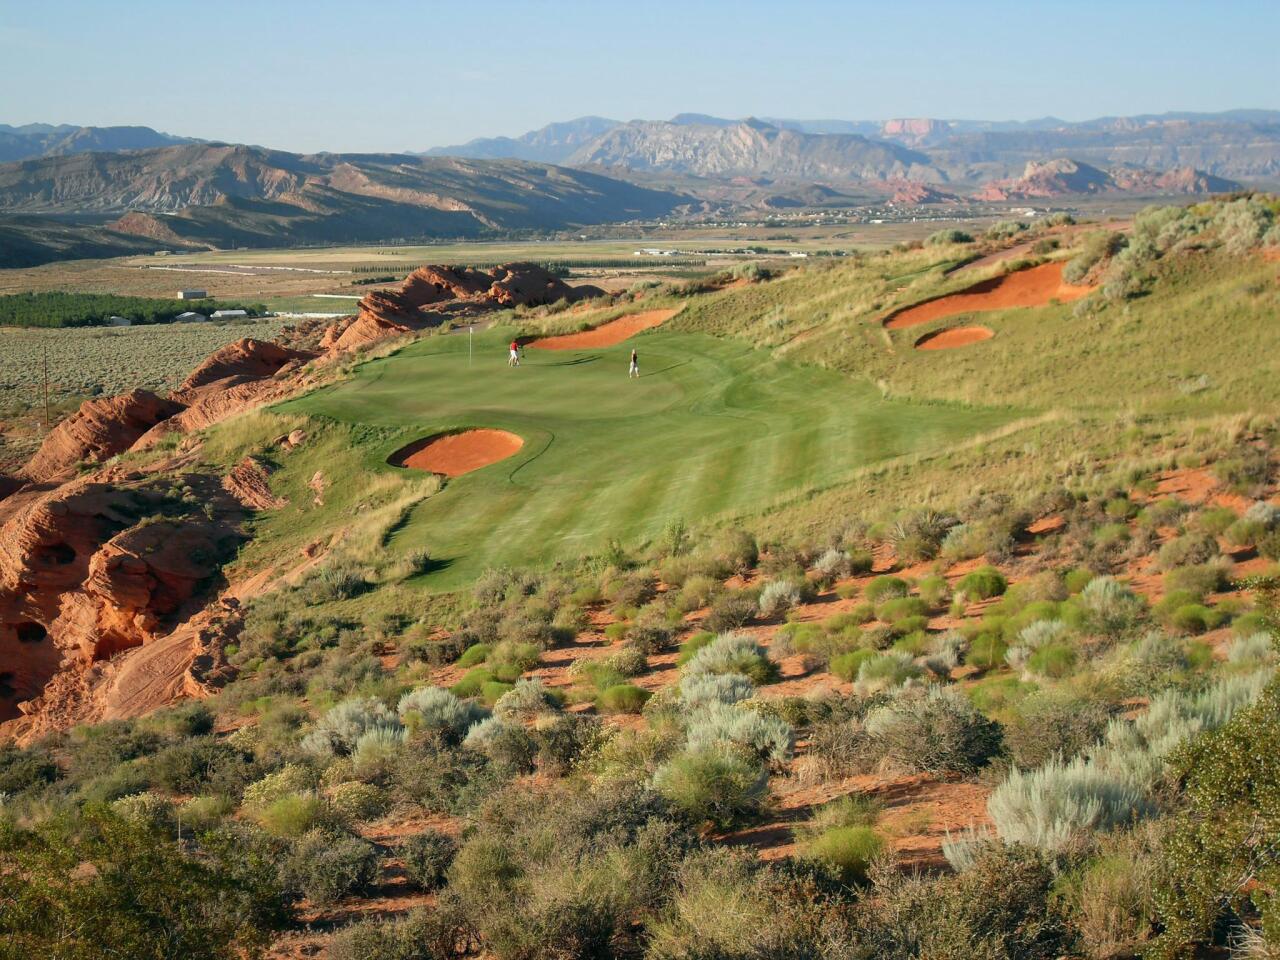 Lush greens set amid black lava rocks and red sandstone cliffs make St. George one of the more scenic desert golf destinations in the country. But there's another equally alluring draw: the value.